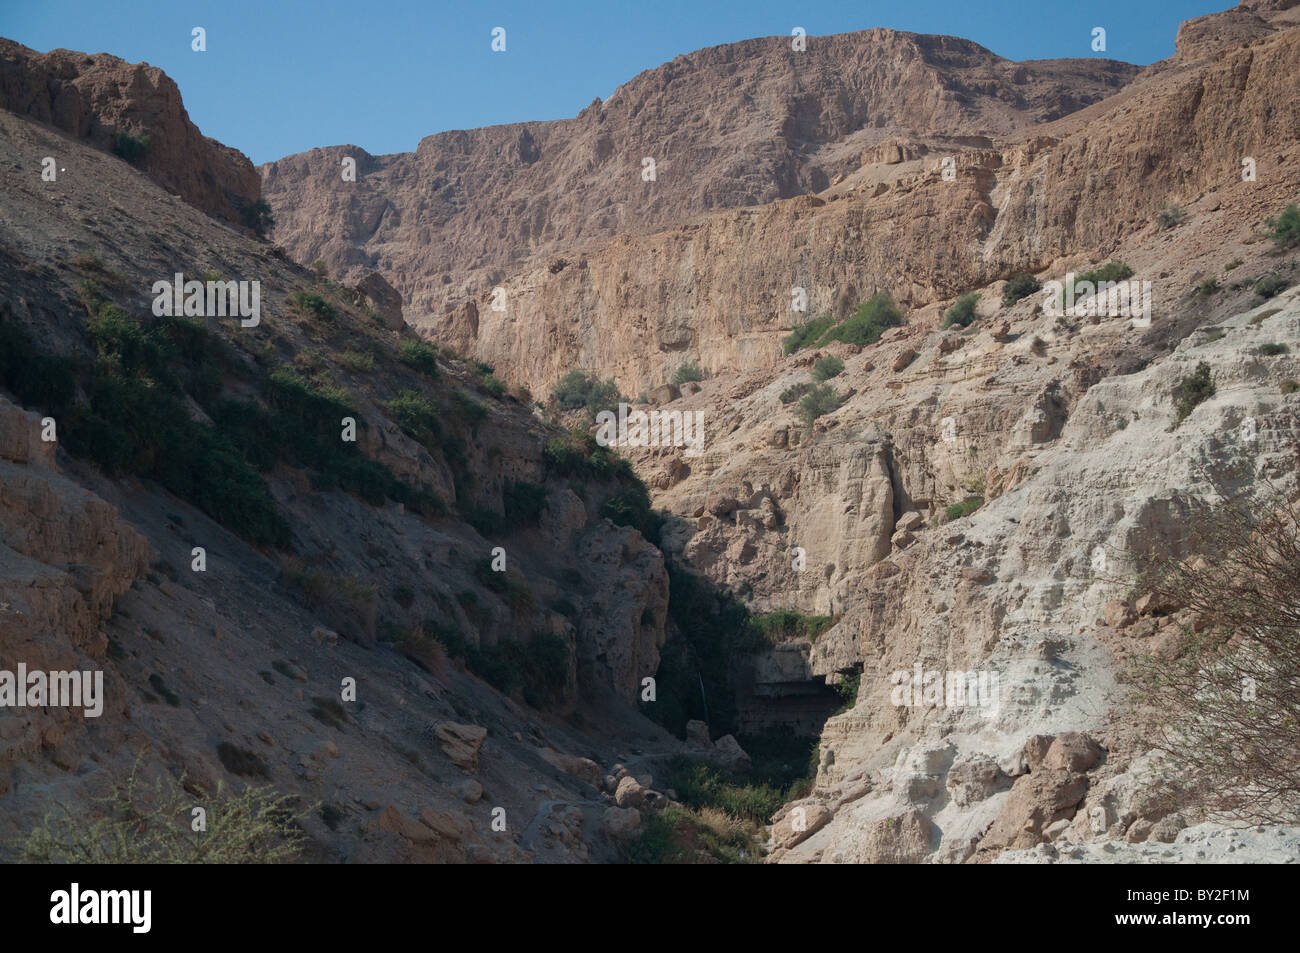 A view of the waterfall at Ein Gedi National Park. Stock Photo